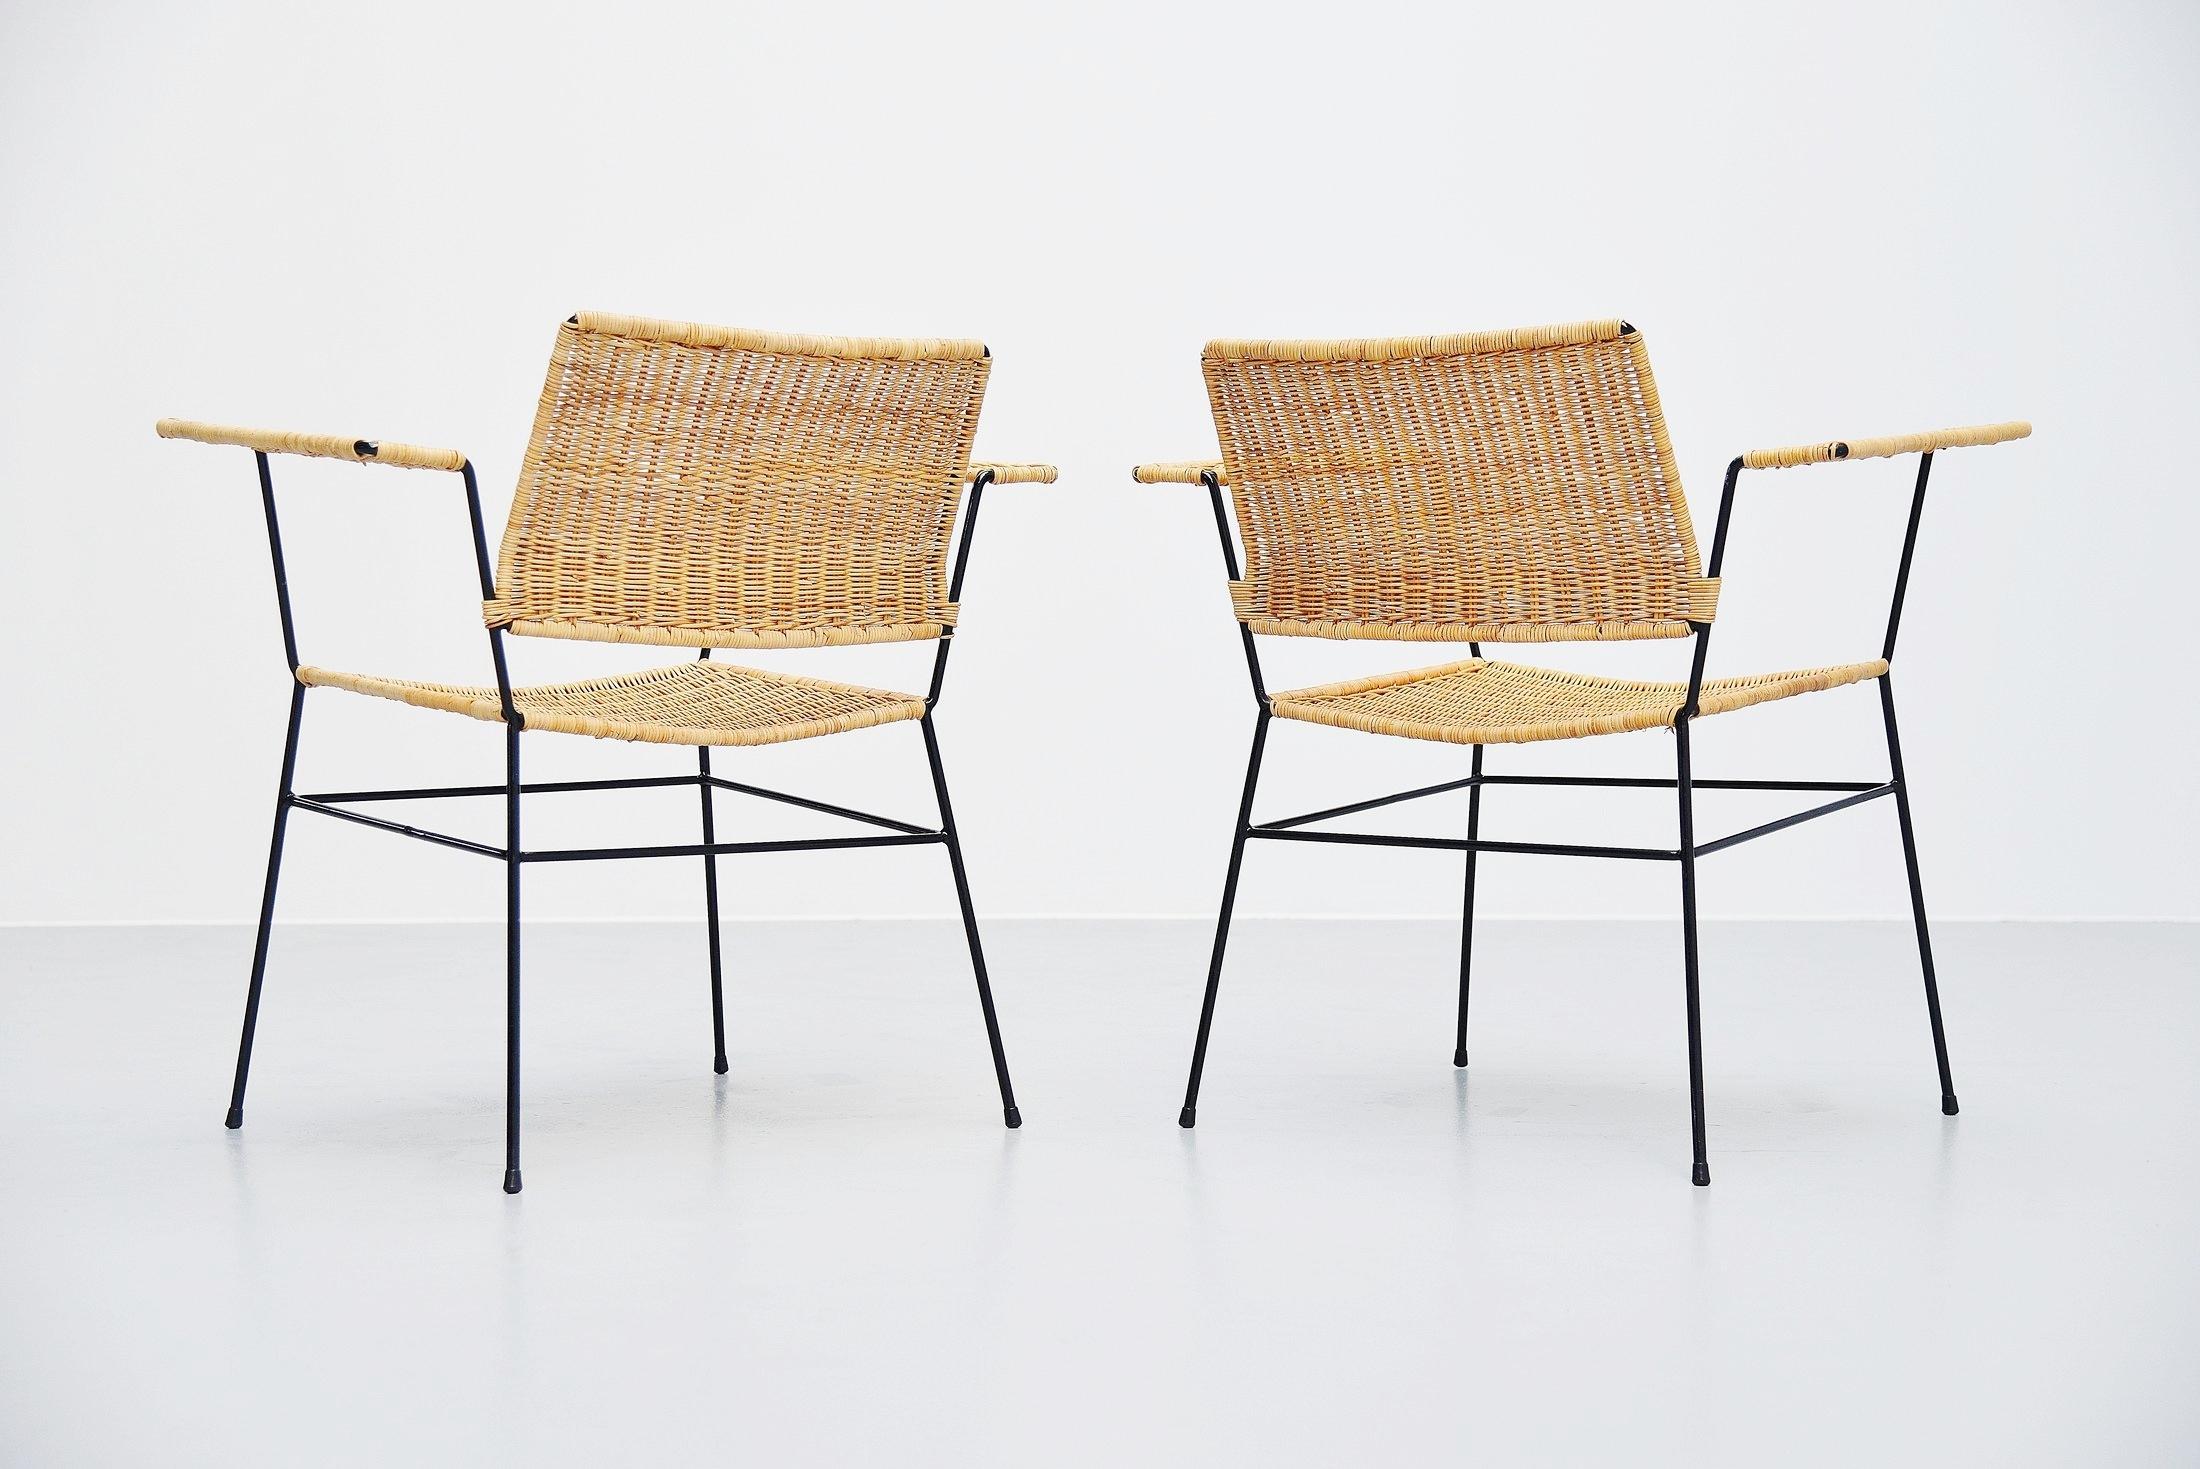 Fantastic pair of armchairs designed by Herta Maria Witzemann and manufactured by Erwin Behr, Germany 1954. The chairs have solid metal frames and hand woven cane seats and armrests. Super shaped pair of chairs and comfortable seating too. The